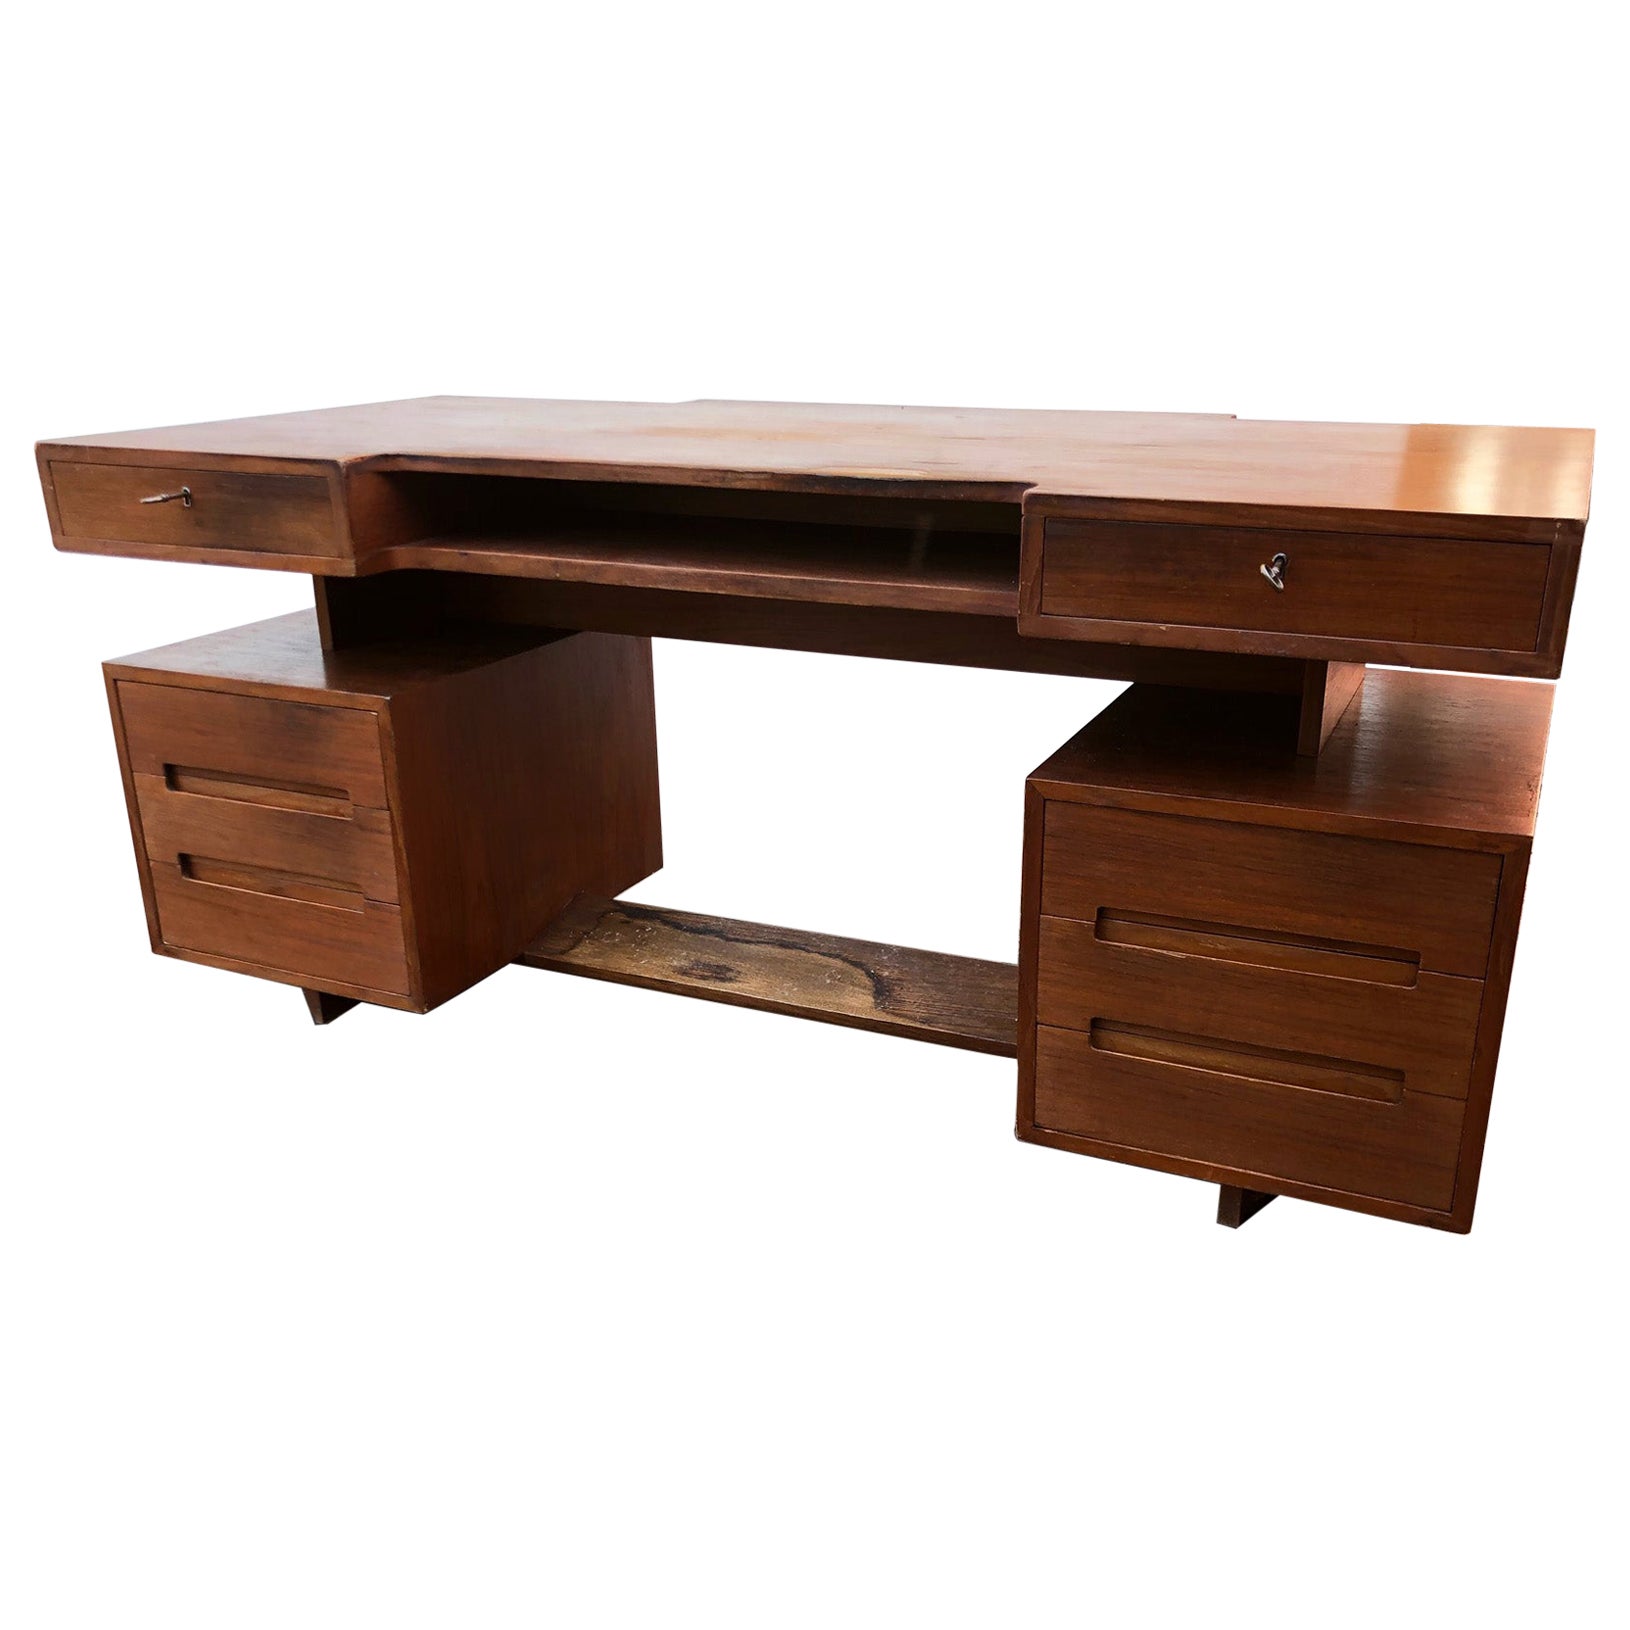 Desk from 1950 with 10 Drawers, Italian Design, Original